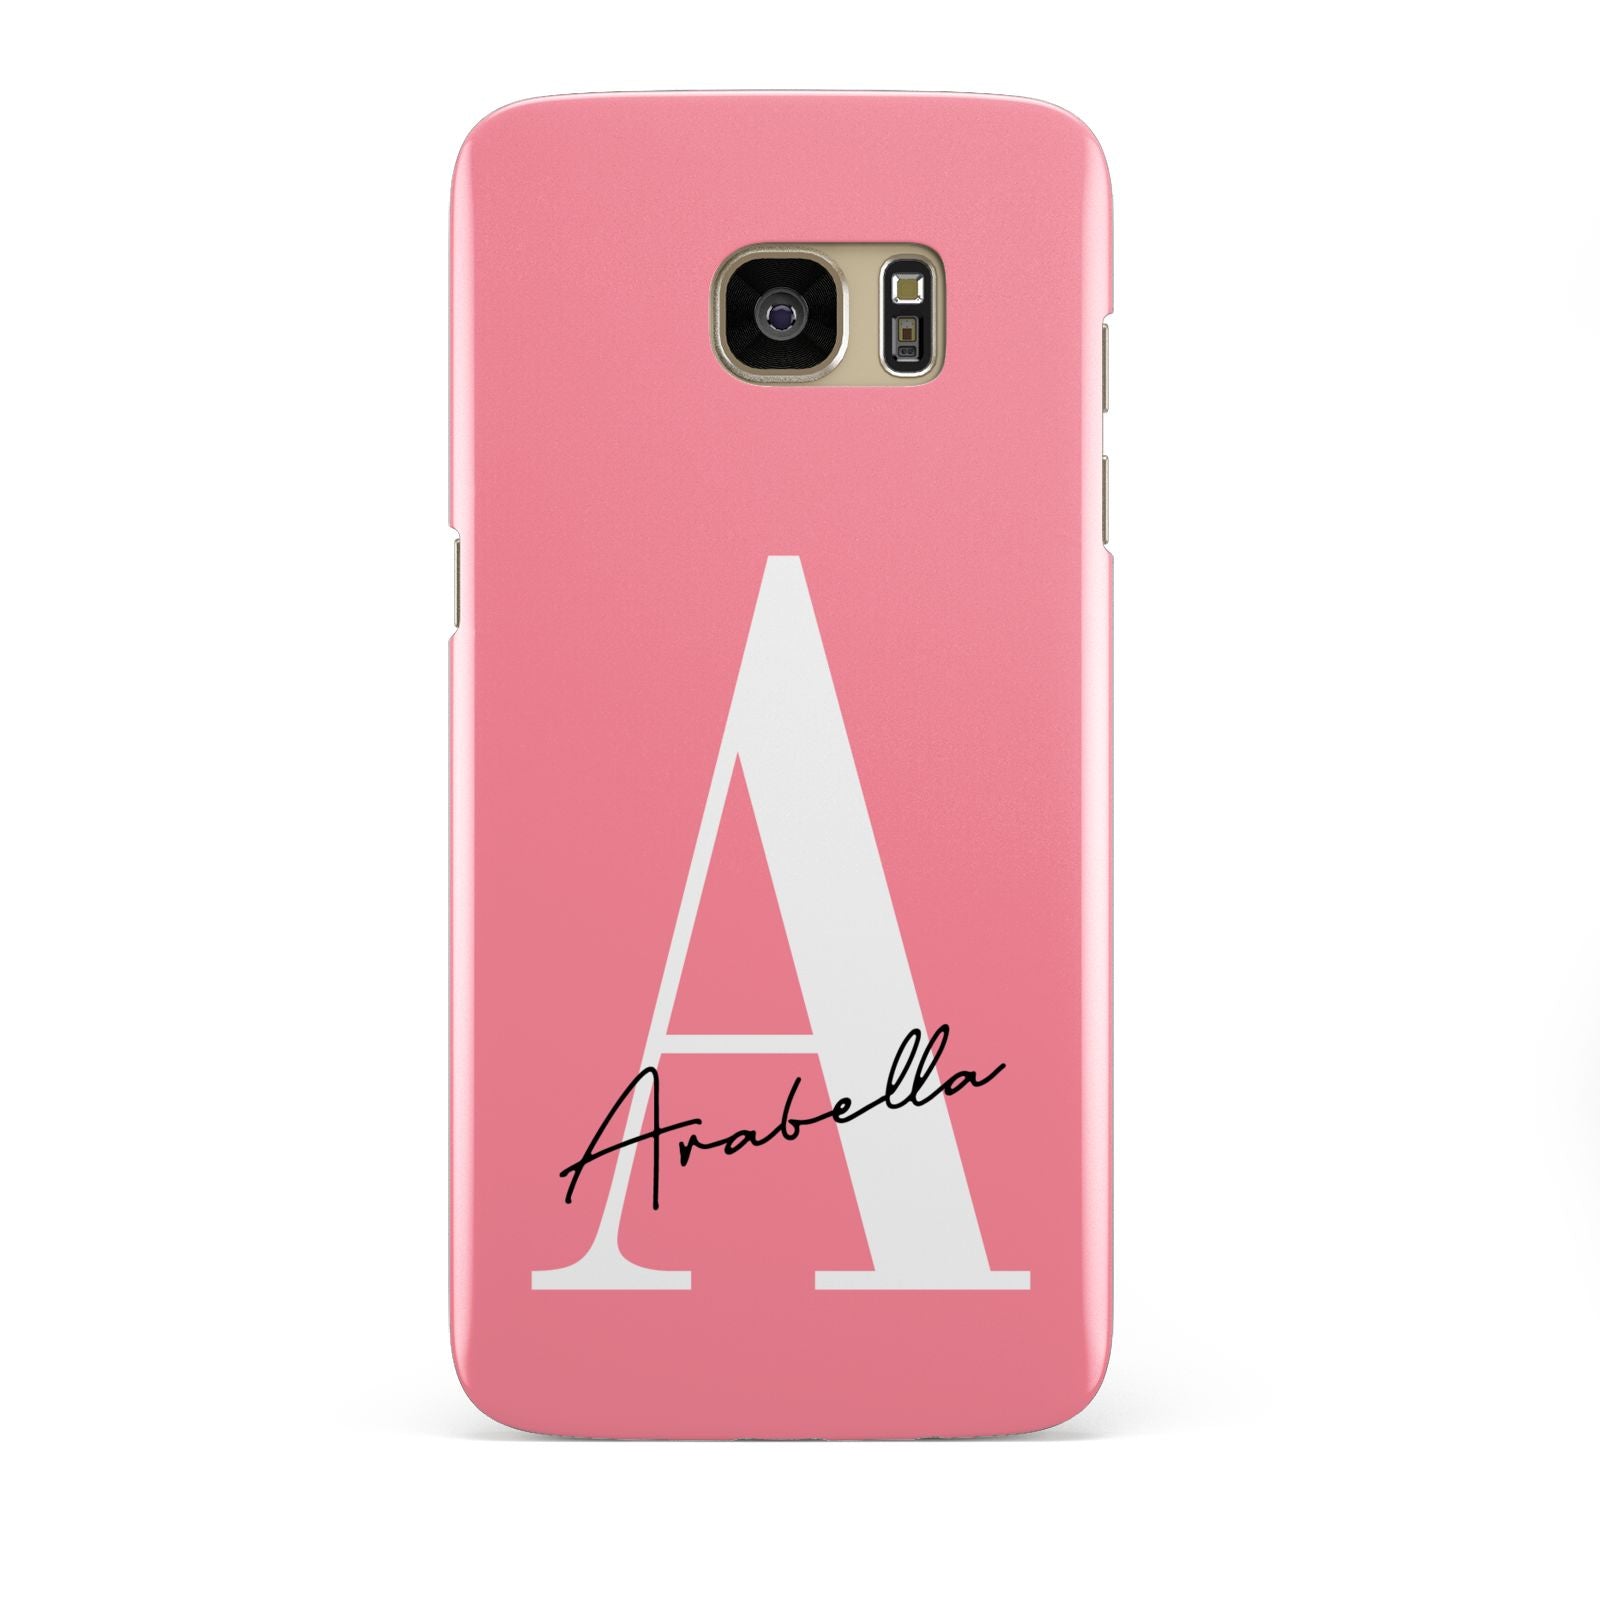 Personalised Pink White Initial Samsung Galaxy S7 Edge Case